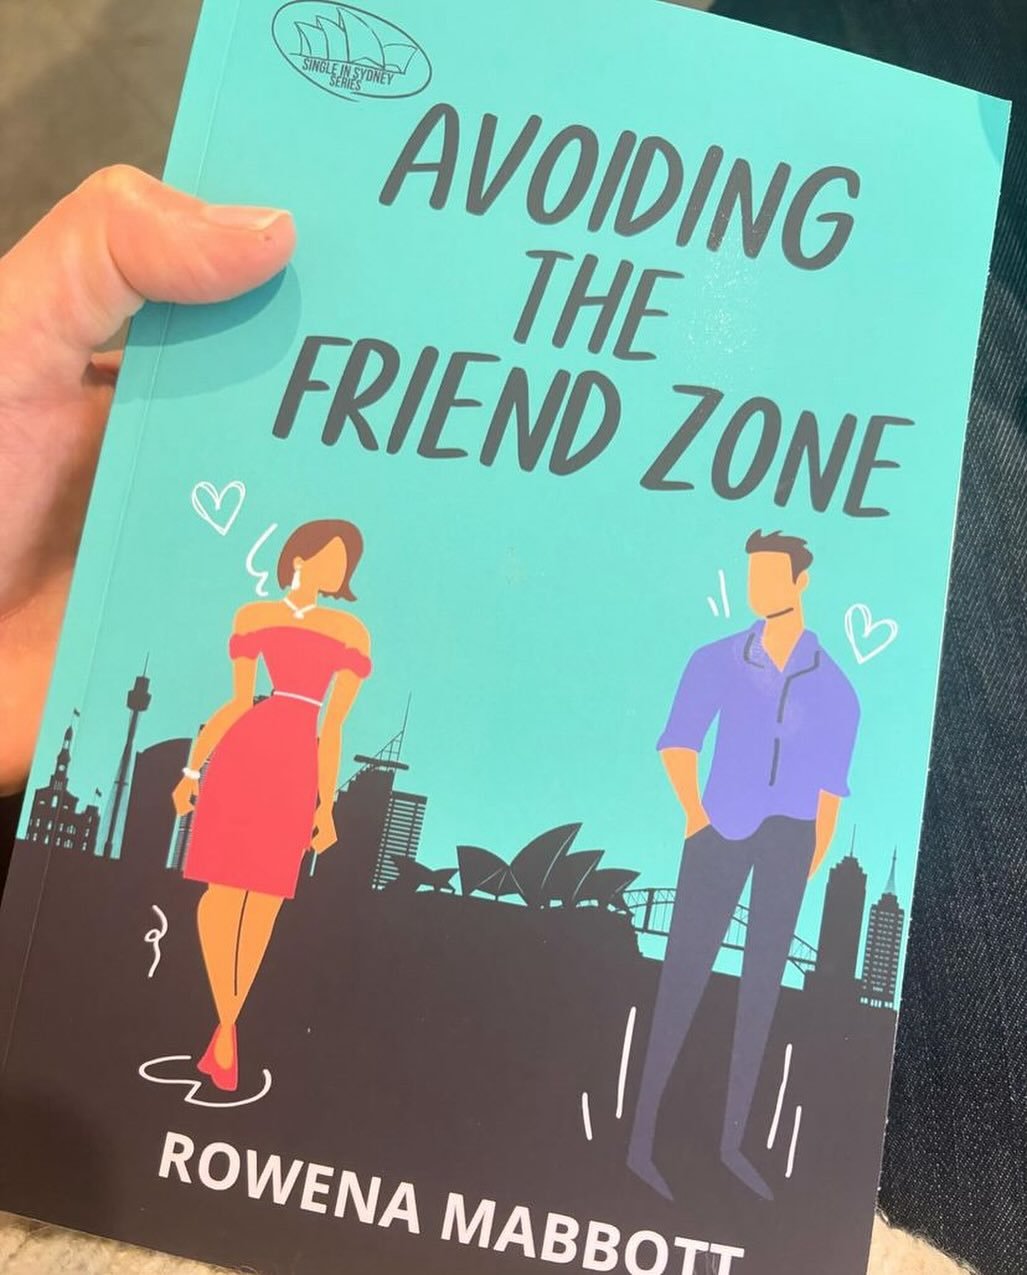 A huge thanks to @katbuttigieg_creative 
for the love! ❤️🙏🏻

I&rsquo;m so pleased you read my book and enjoyed it. What a beautiful review! 🥰

*****

Repost: @katbuttigieg_creative 

Read #17 Avoiding the Friend Zone by @rowenamabbott

I&rsquo;ve 